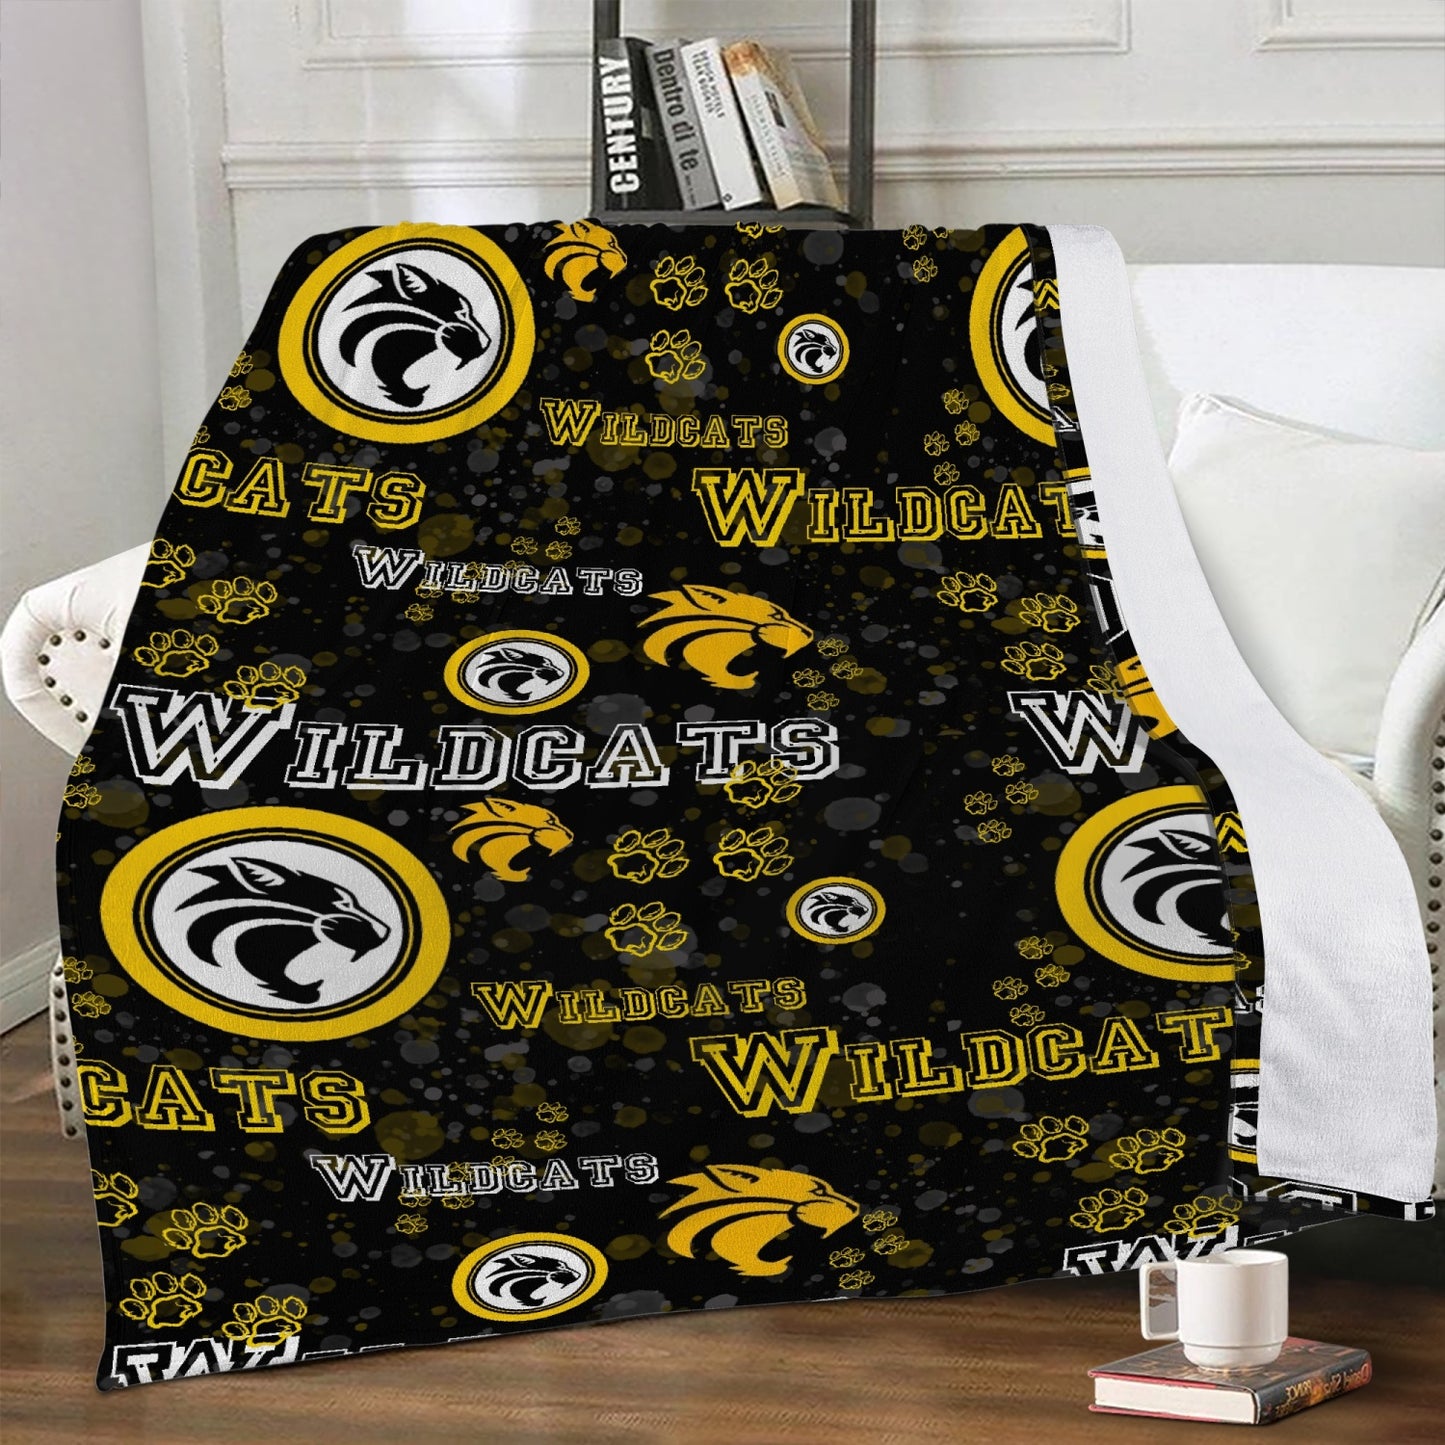 Wildcats Dual-sided Stitched Fleece Blanket